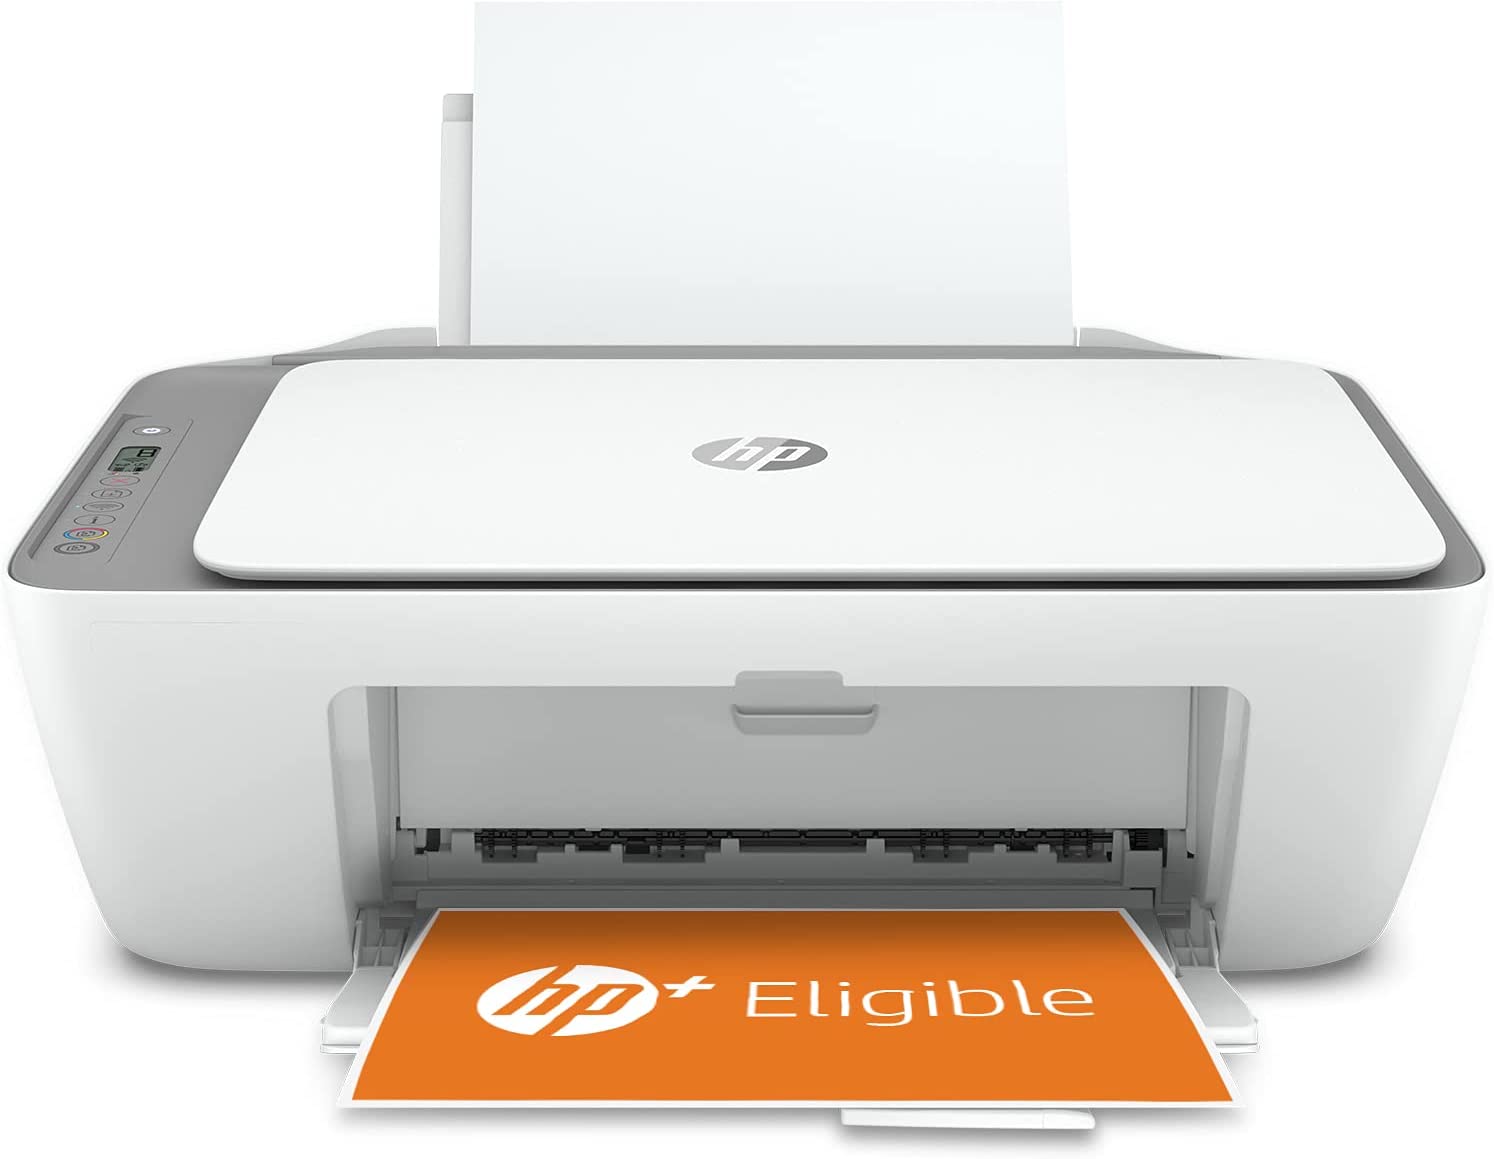 HP DeskJet 2720e All-in-One Colour Printer with 6 months of instant Ink  with HP+, White - eTeknix